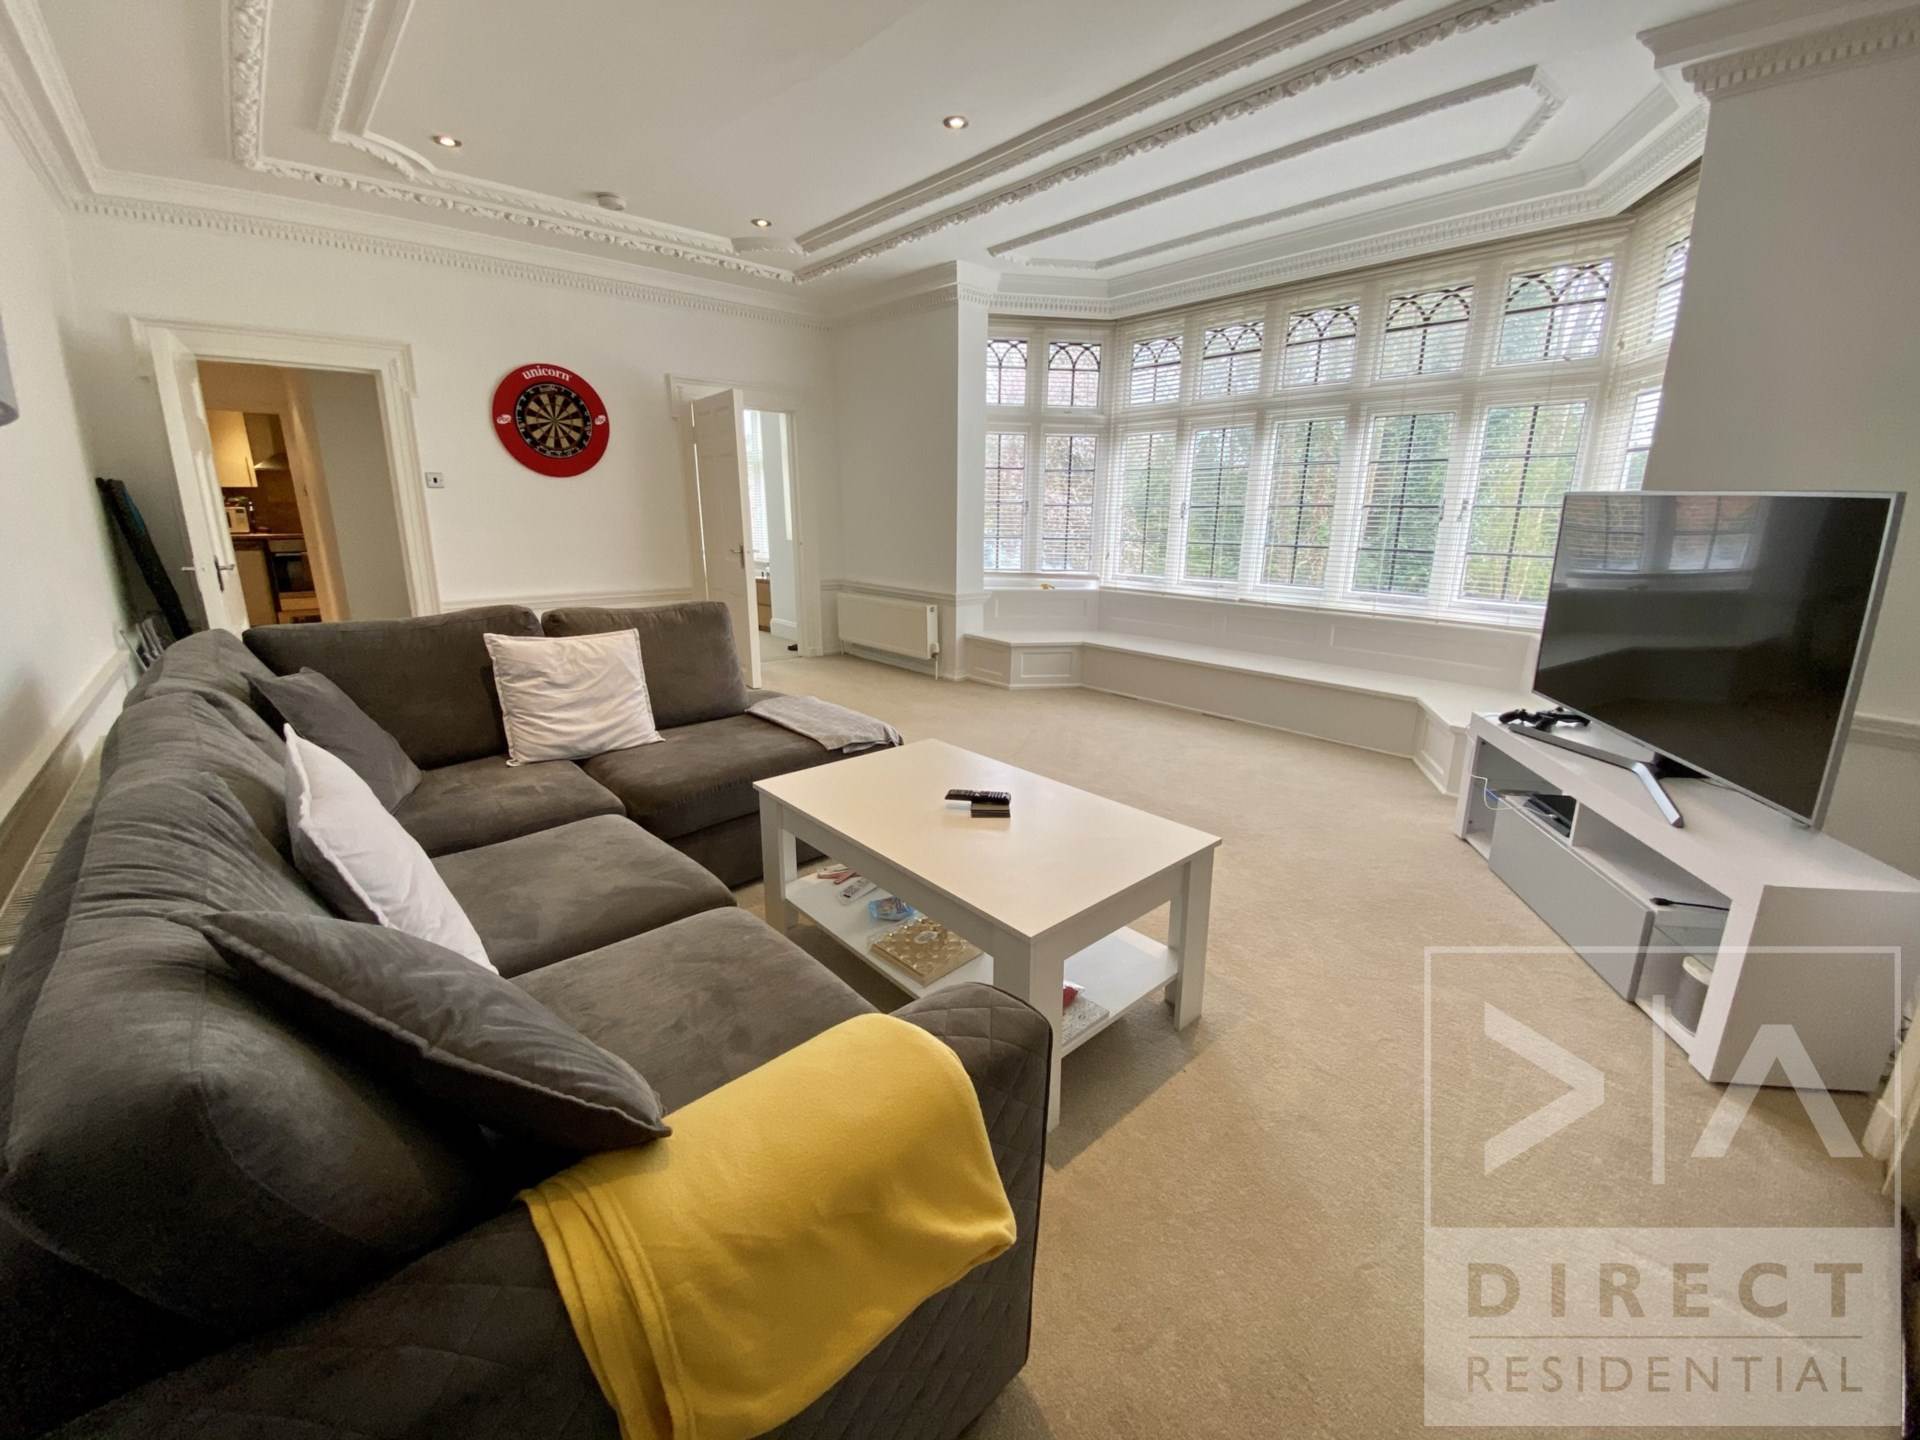 1 bed Apartment for rent in Epsom. From Direct Residential - Epsom